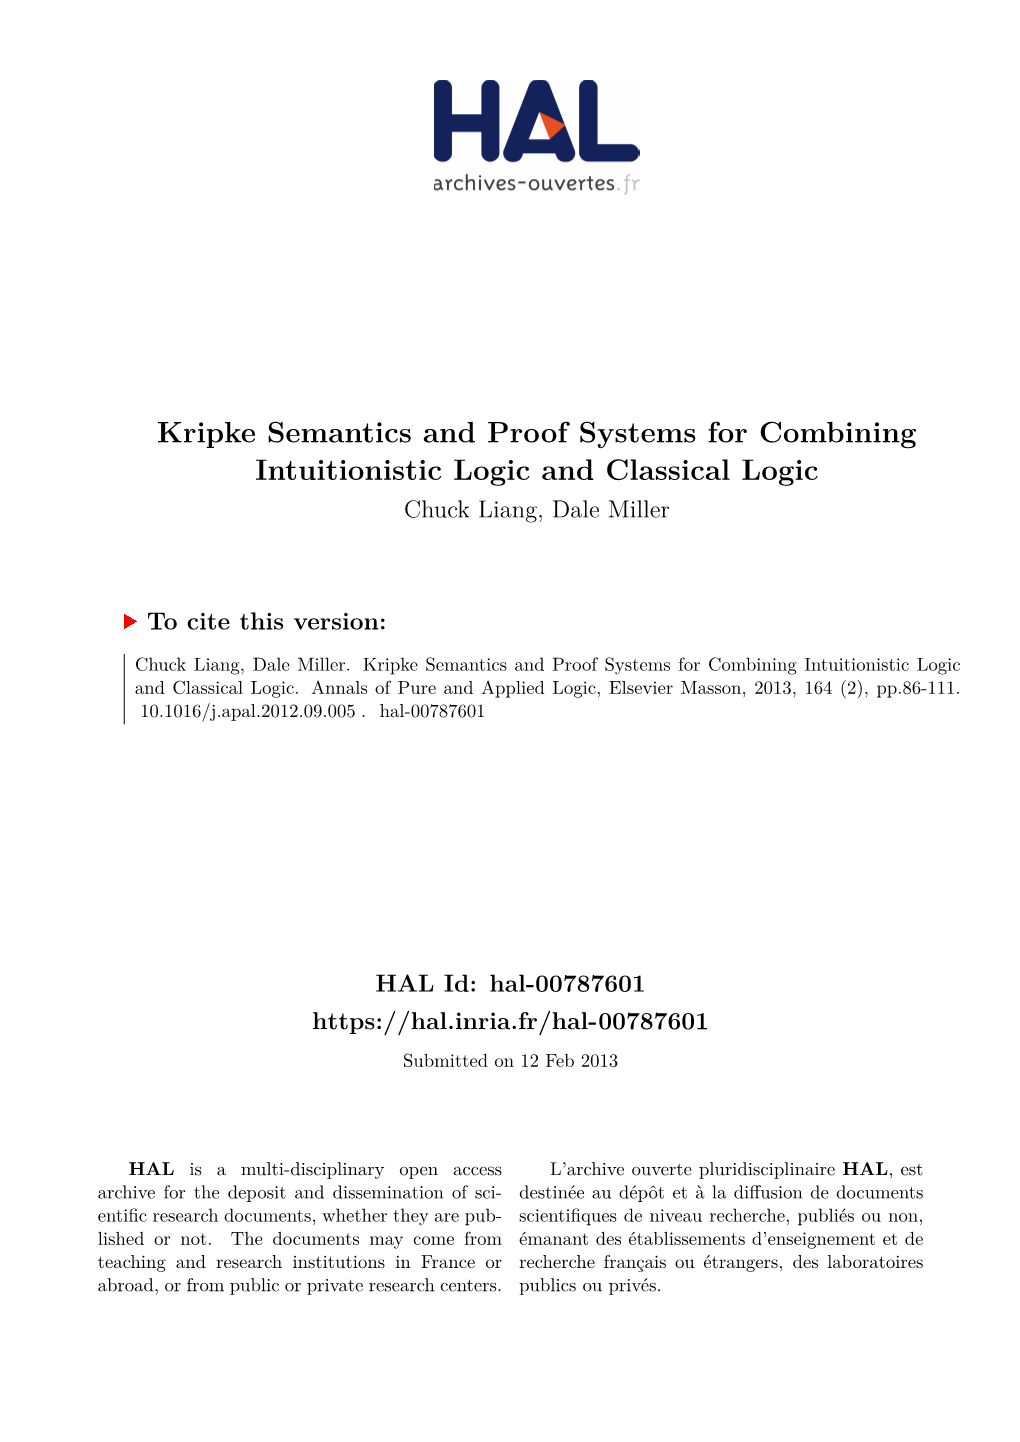 Kripke Semantics and Proof Systems for Combining Intuitionistic Logic and Classical Logic Chuck Liang, Dale Miller